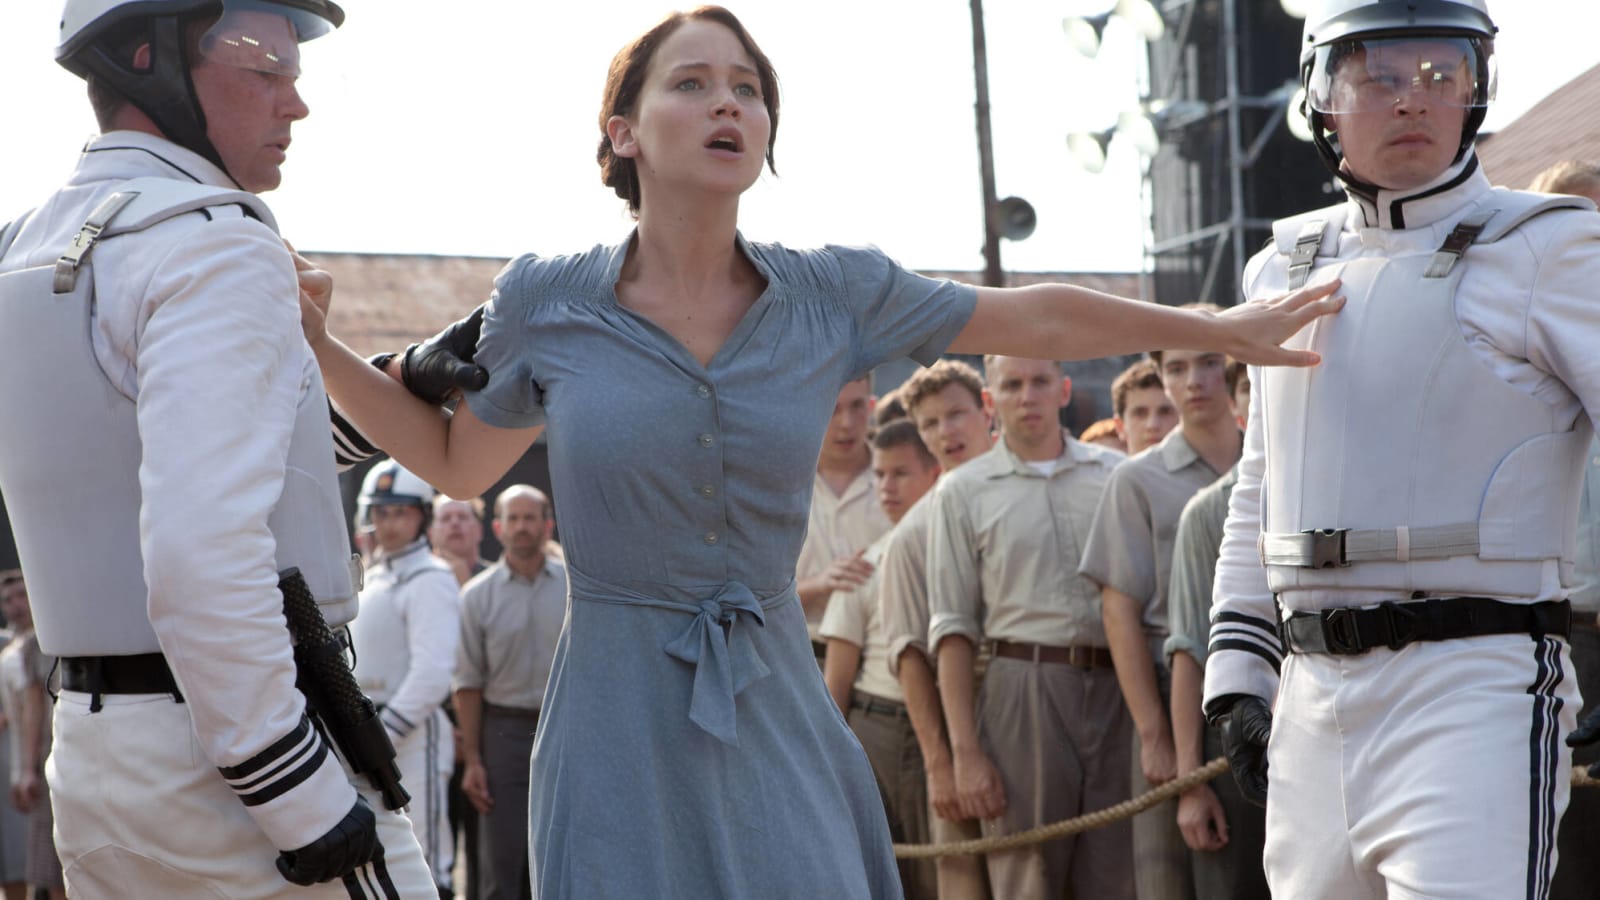 20 facts you might not know about 'The Hunger Games'